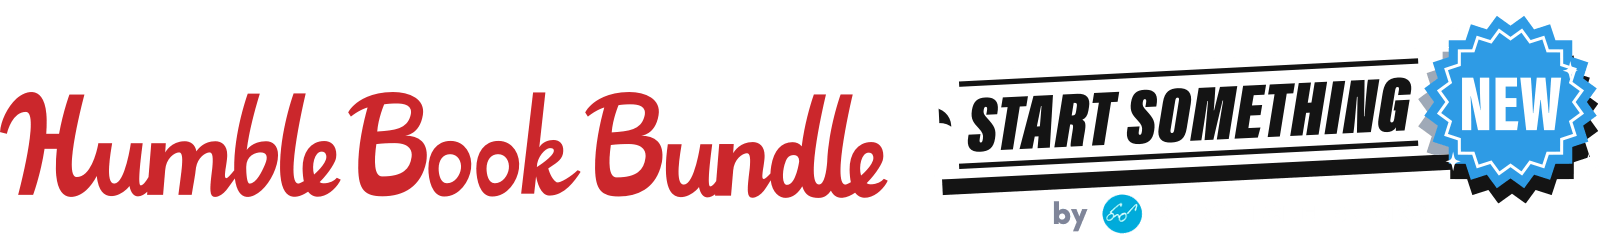 Humble Book Bundle: Start Something New by Chronicle